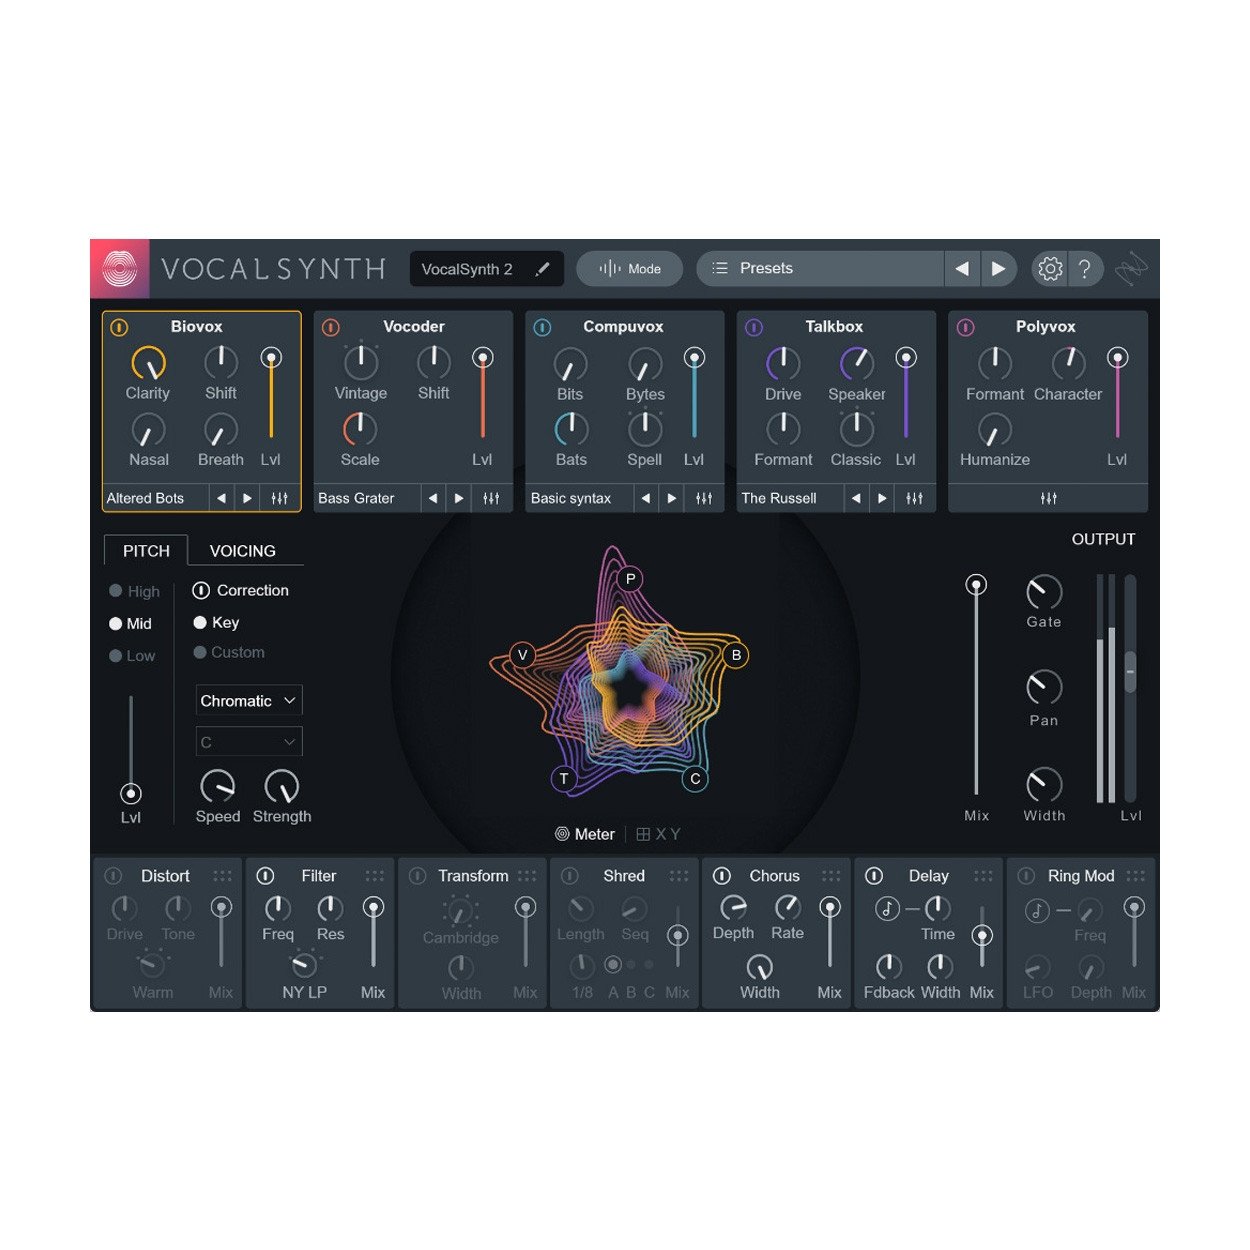 download the last version for windows iZotope VocalSynth 2.6.1